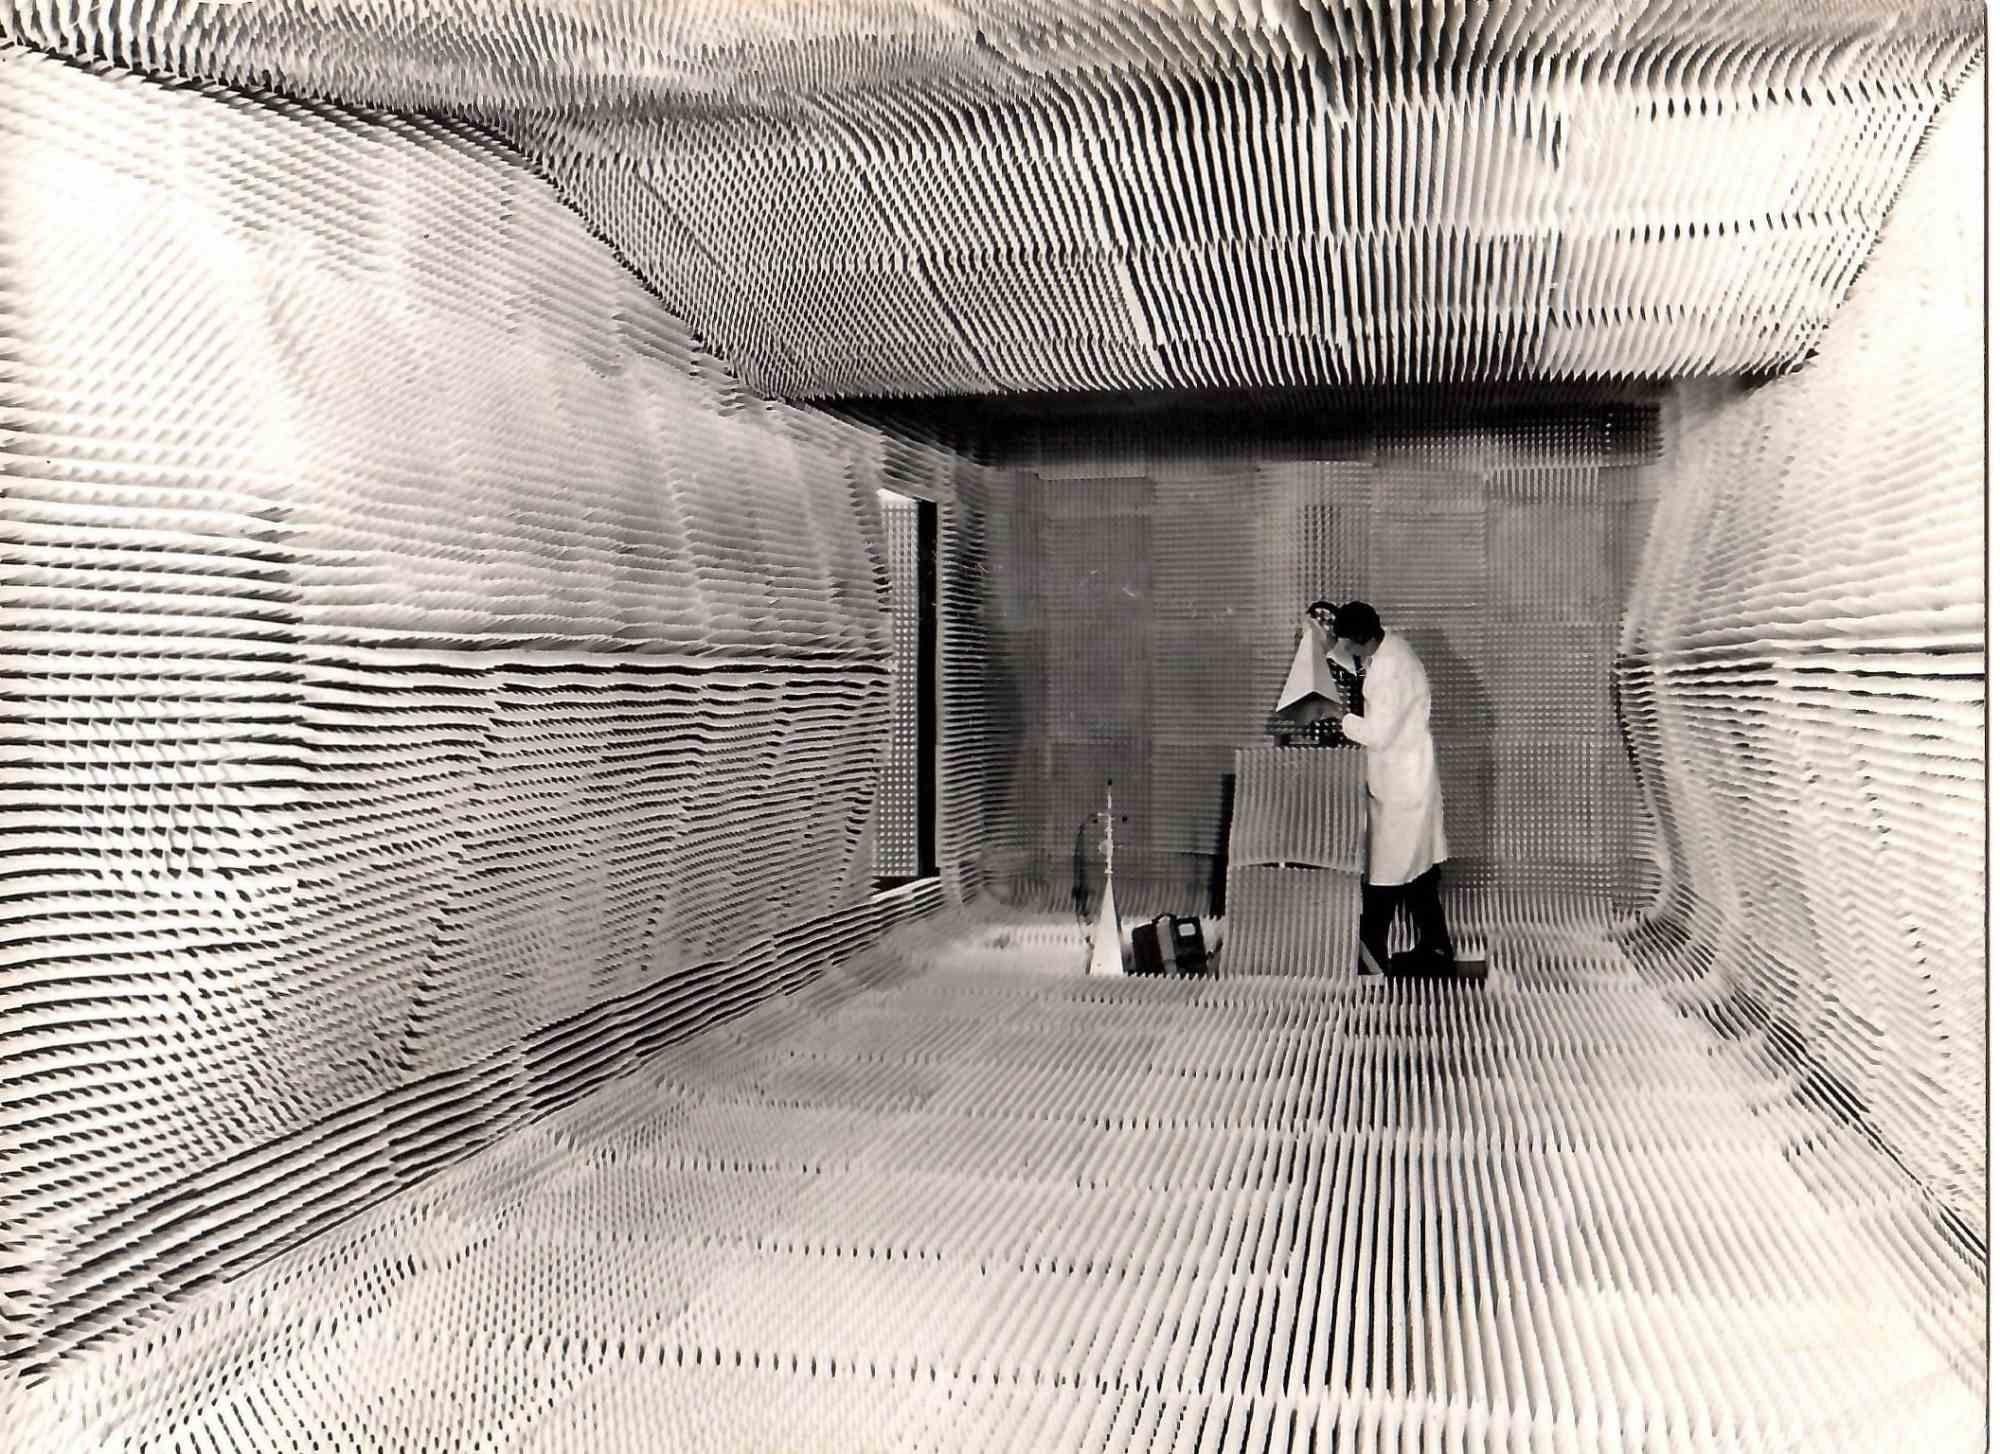 Unknown Black and White Photograph - Vintage Photograph of an Anti-Electric Space - 1955